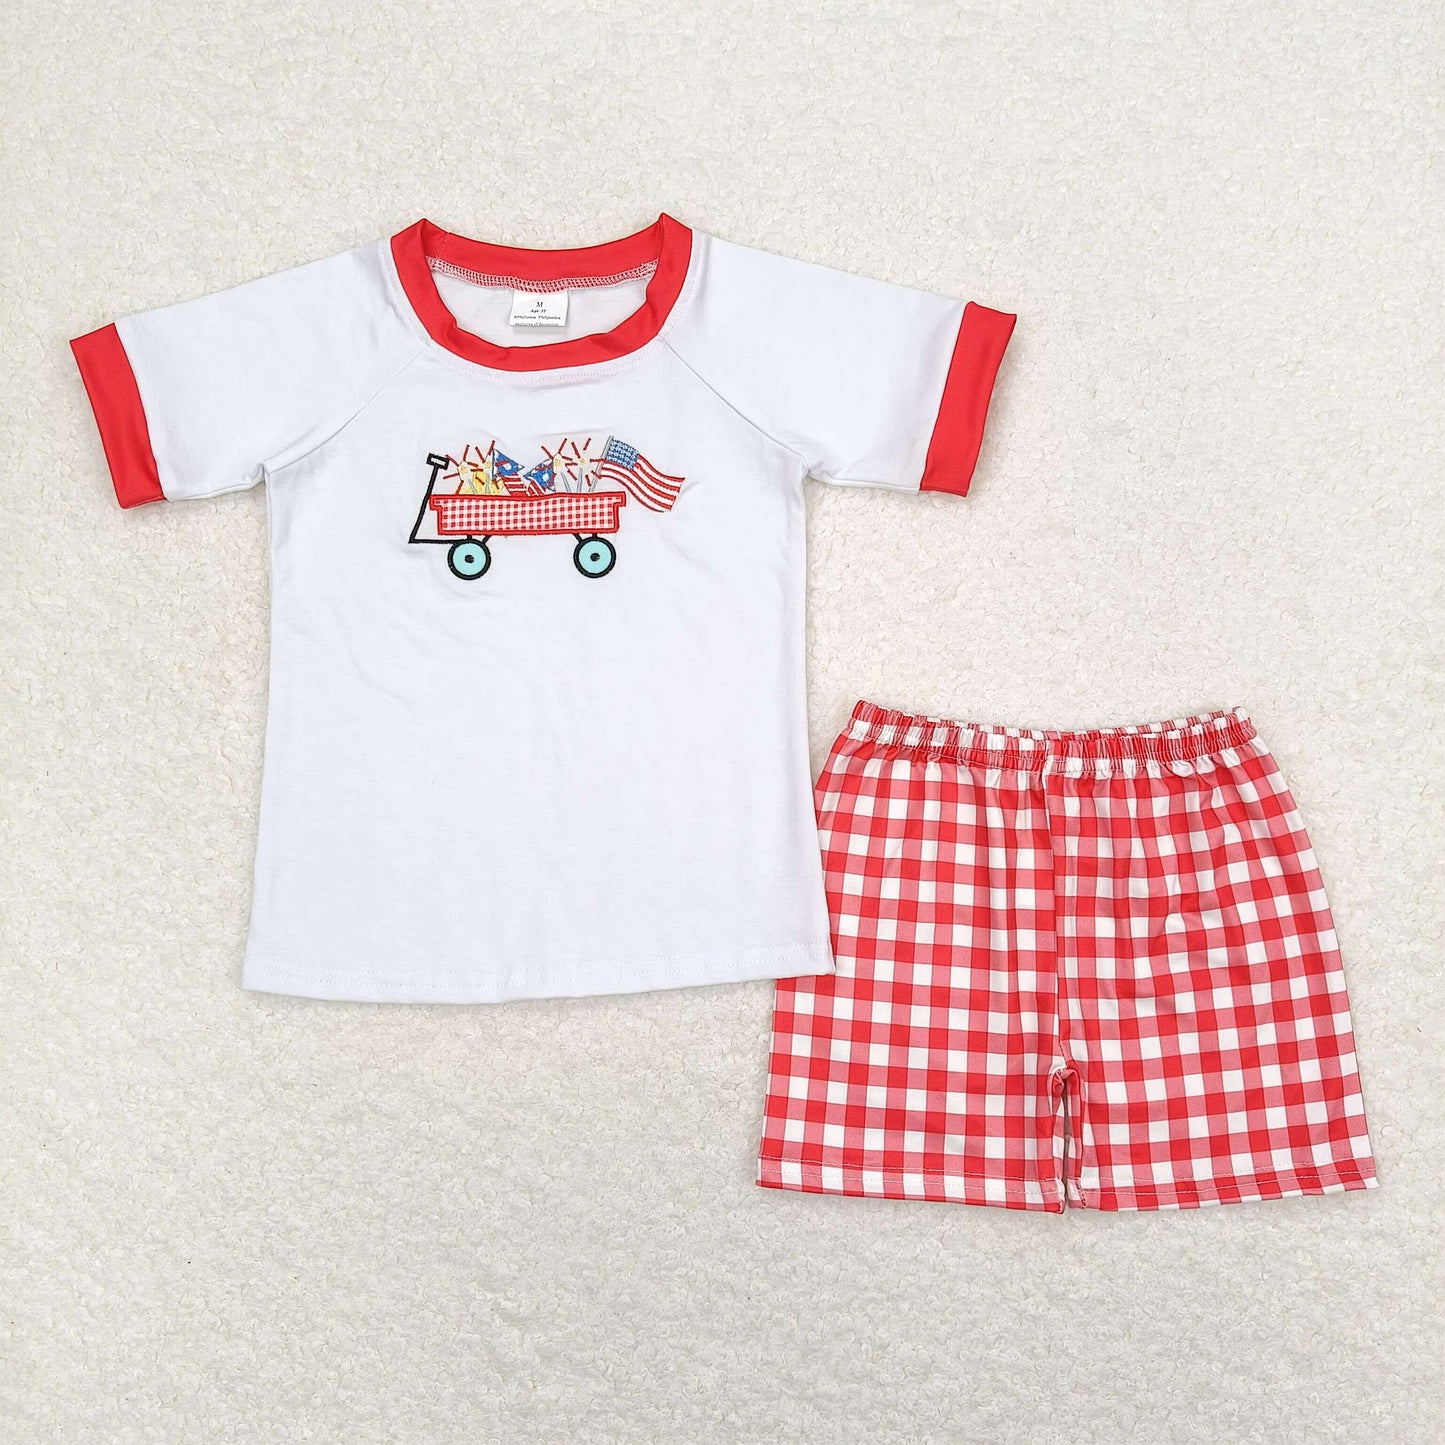 4th of july target embroidery boy shorts set